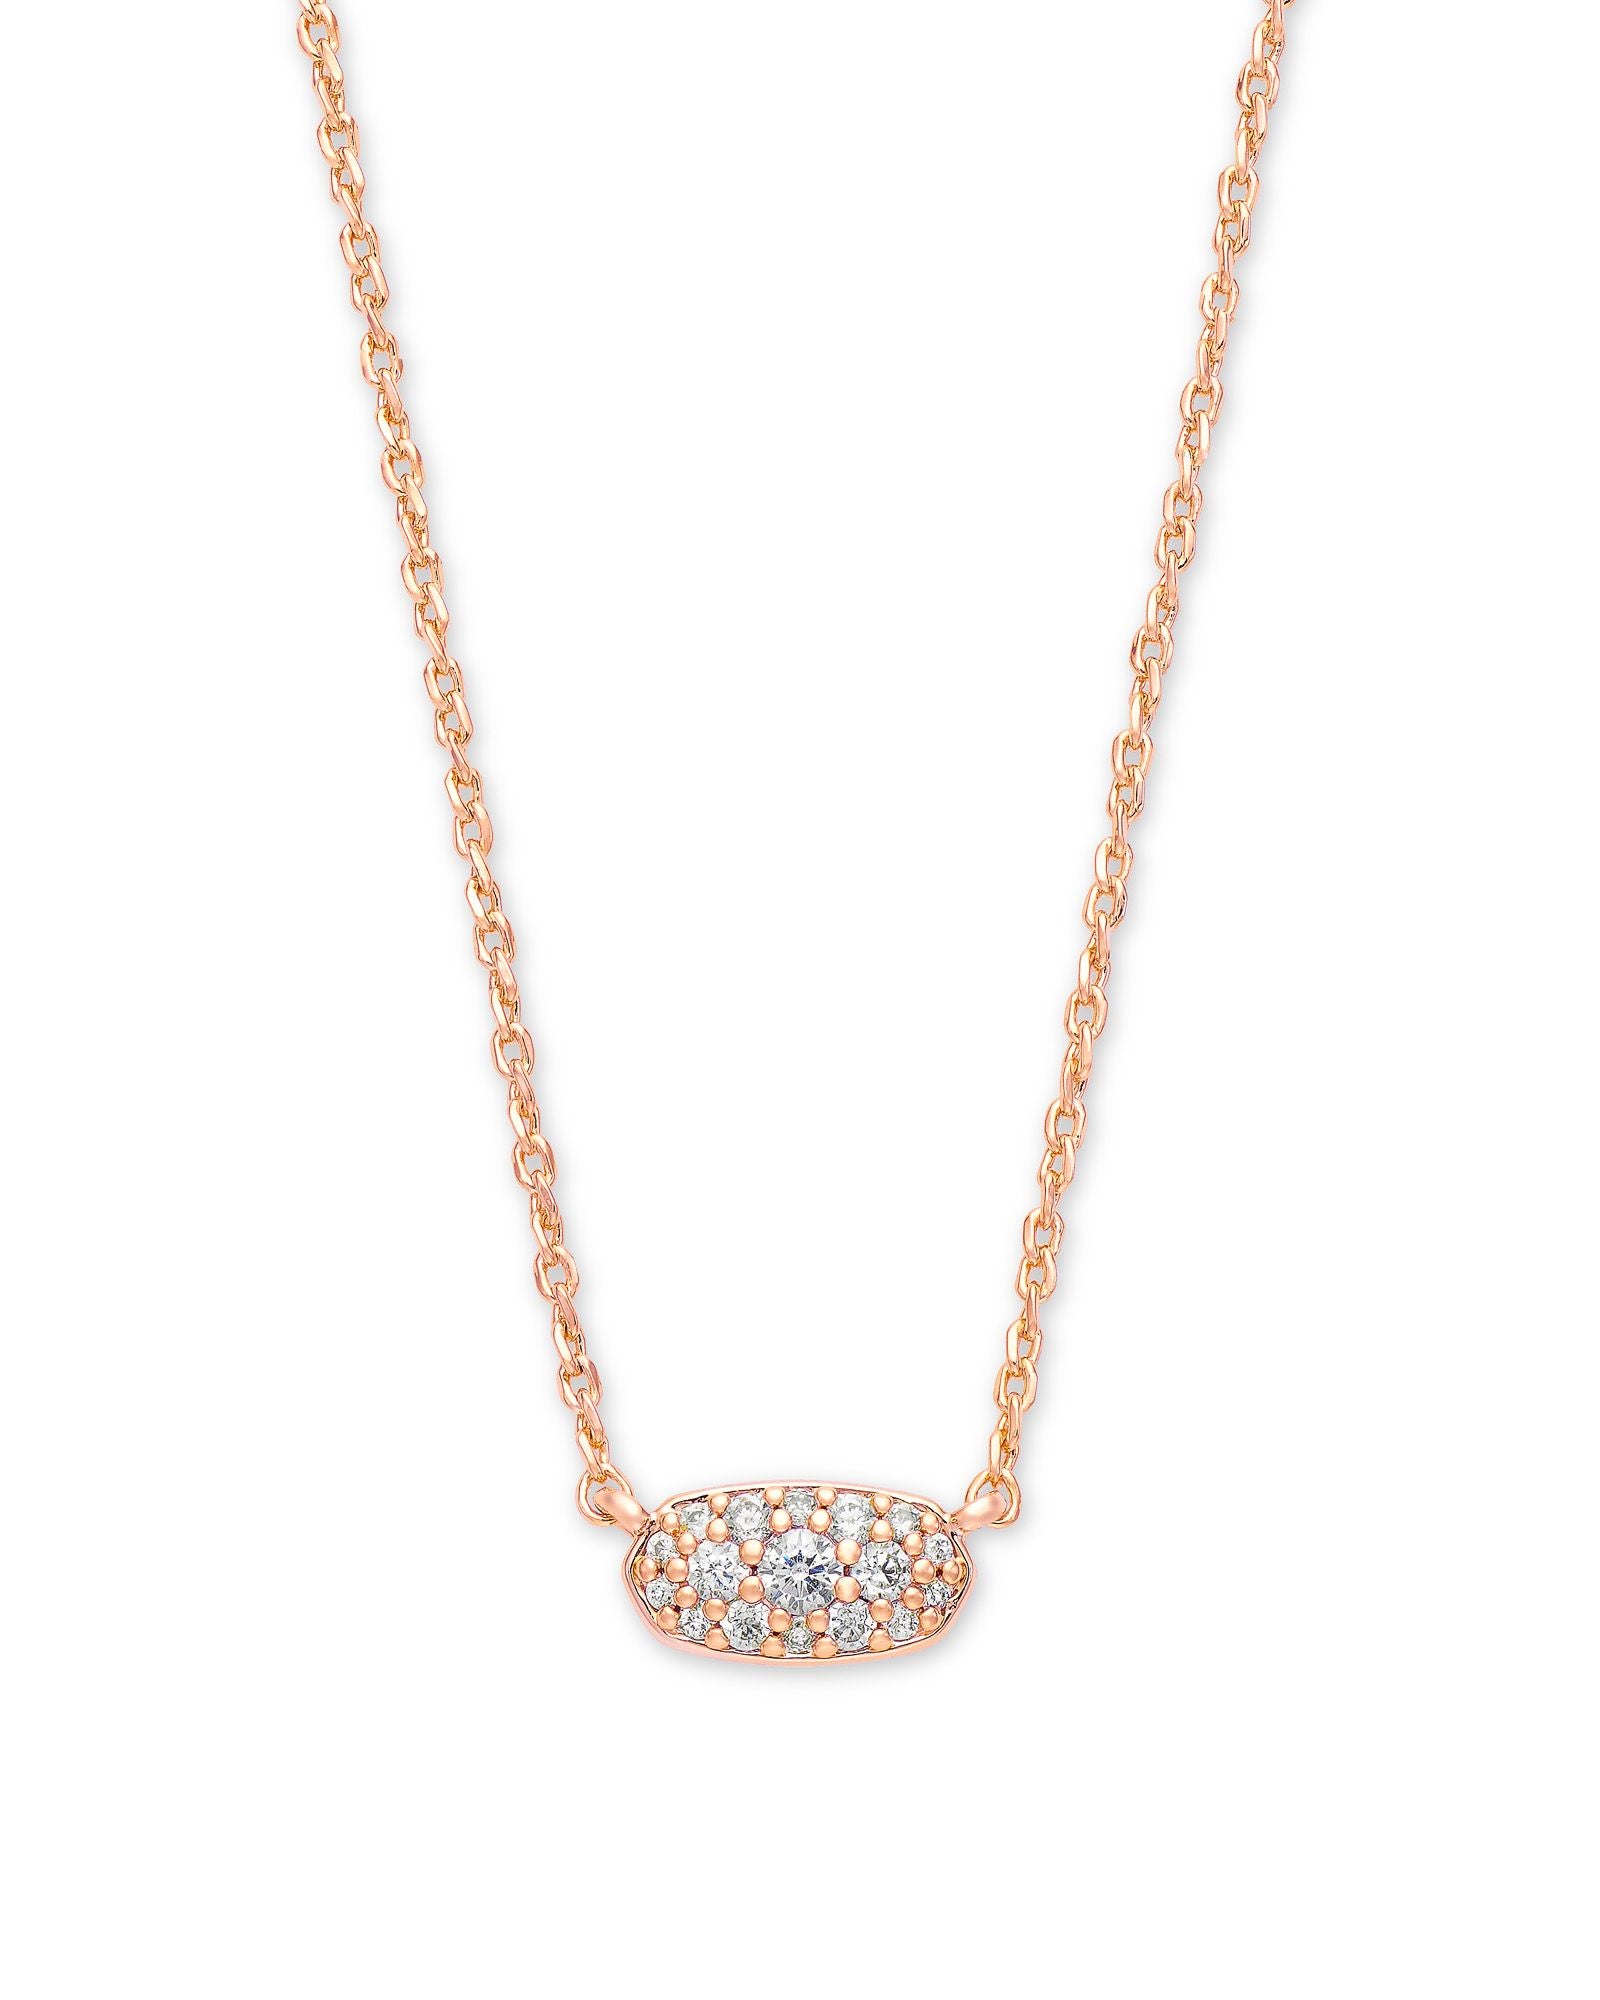 Grayson Crystal Pendant Necklace Silver, Gold or Rose Gold